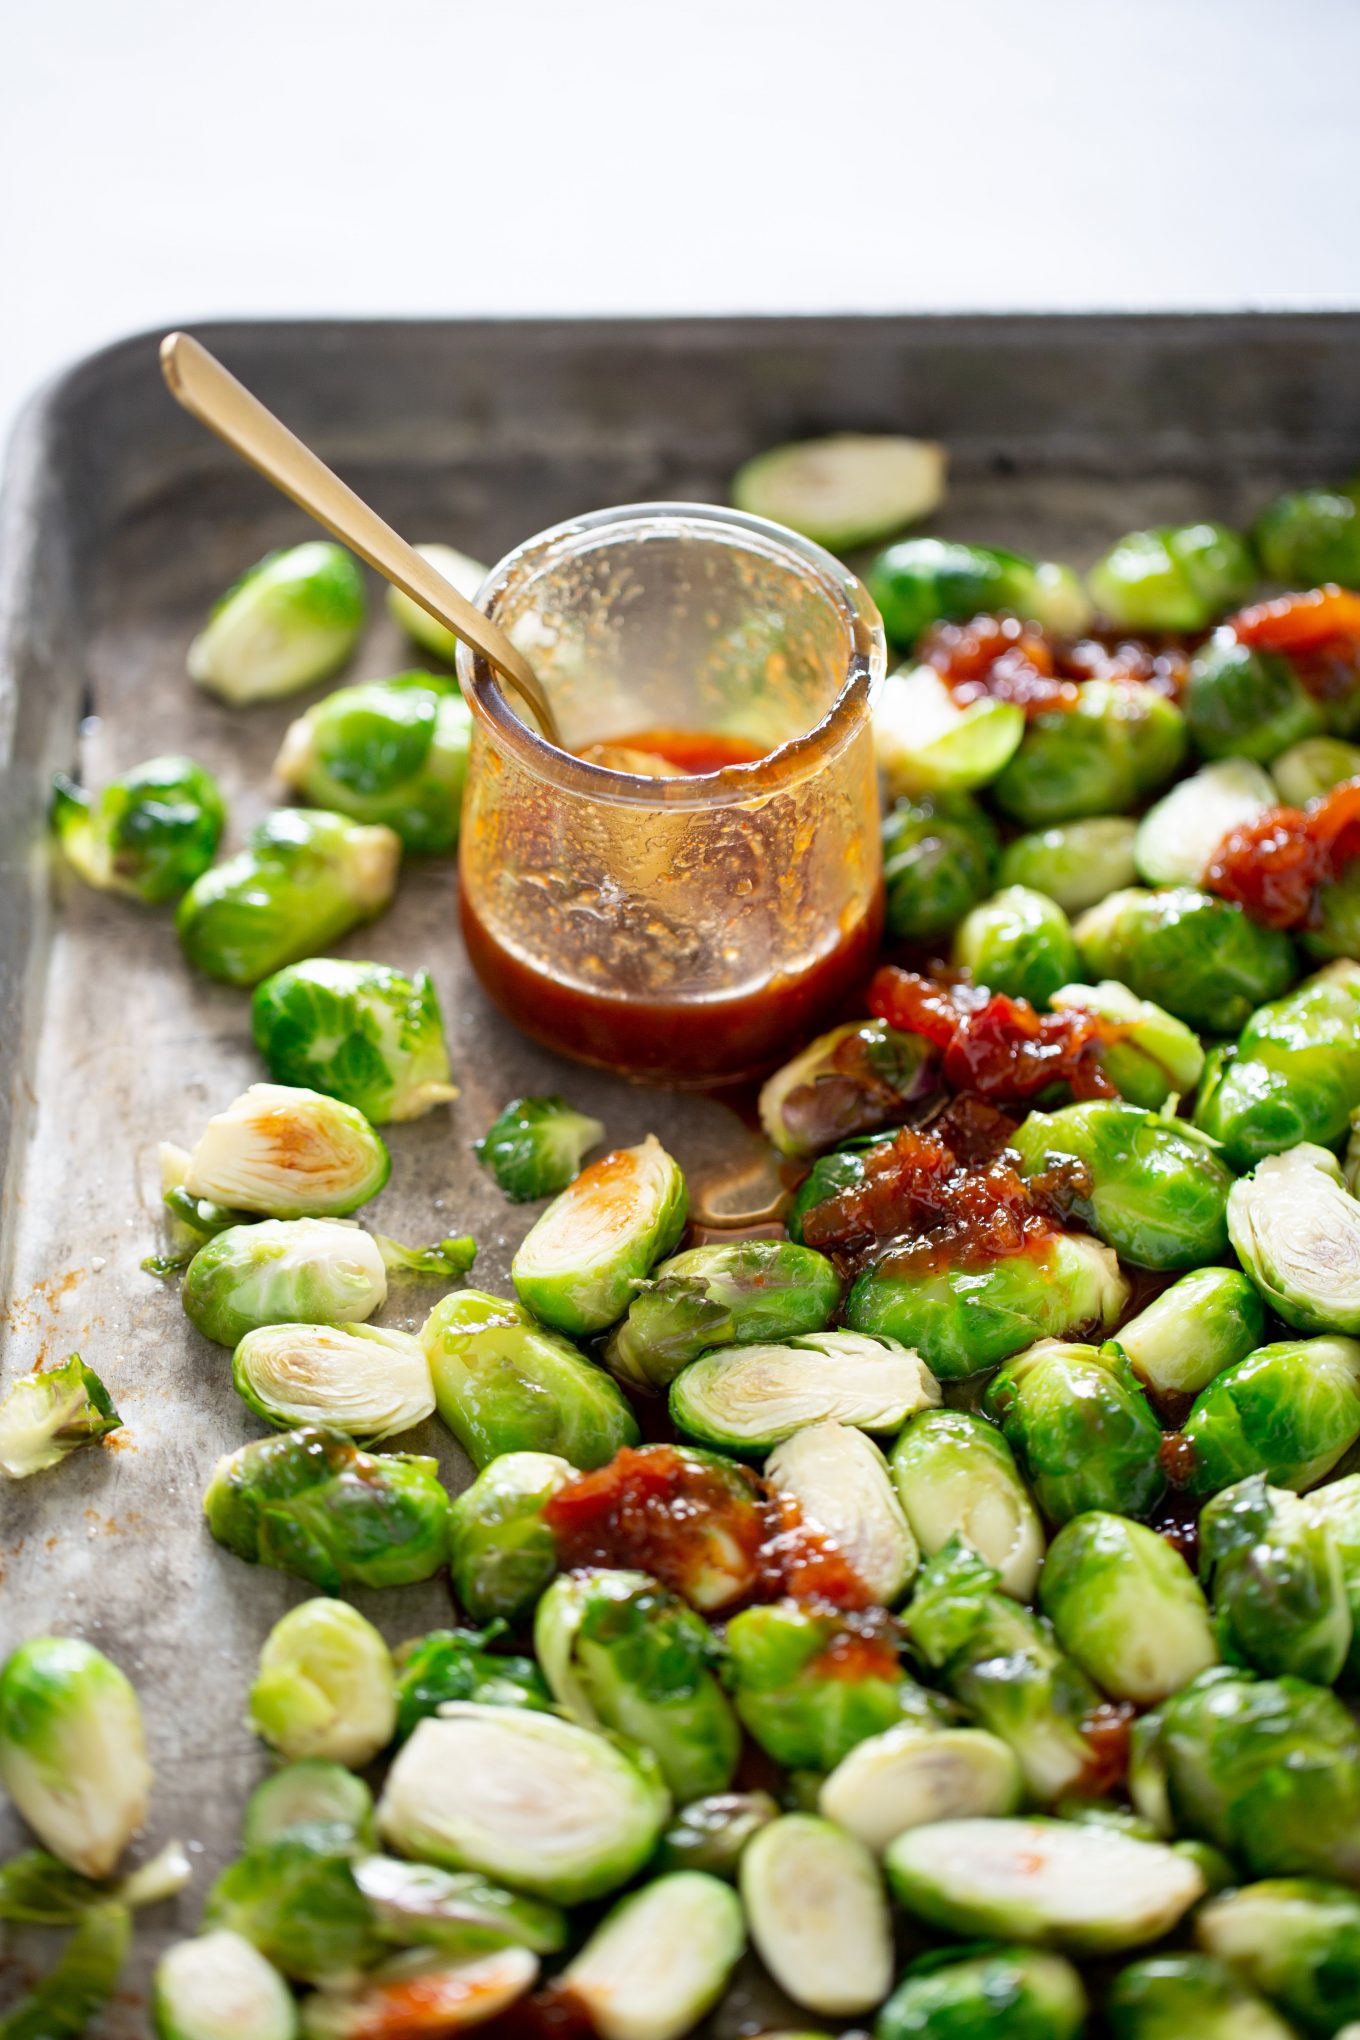 brussels spsrouts over baking sheet covered with sweet and spicy sauce.